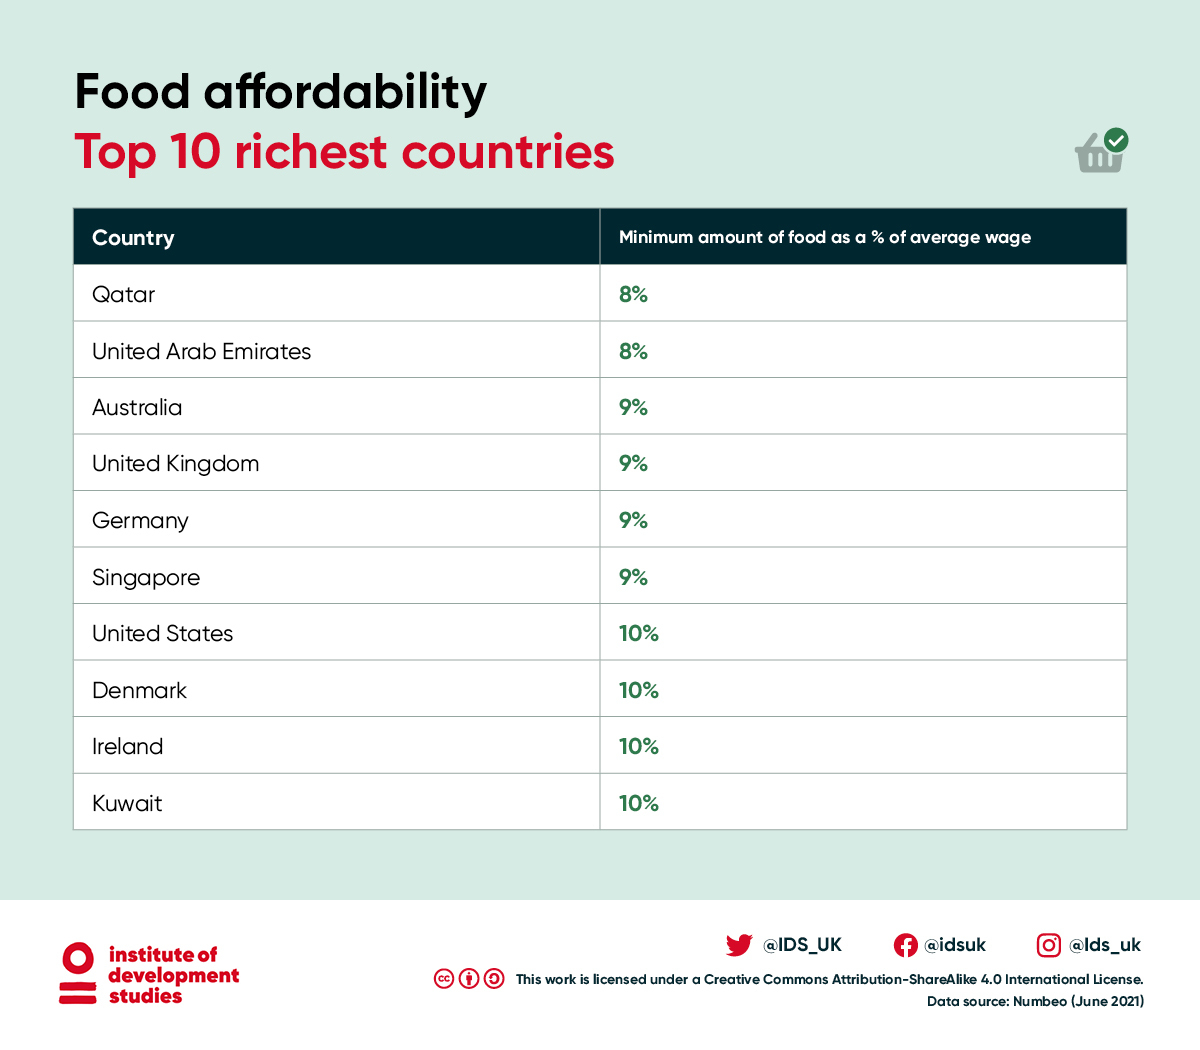 Table showing the top ten richest countries in terms of the minimum amount of food as % of average wage.